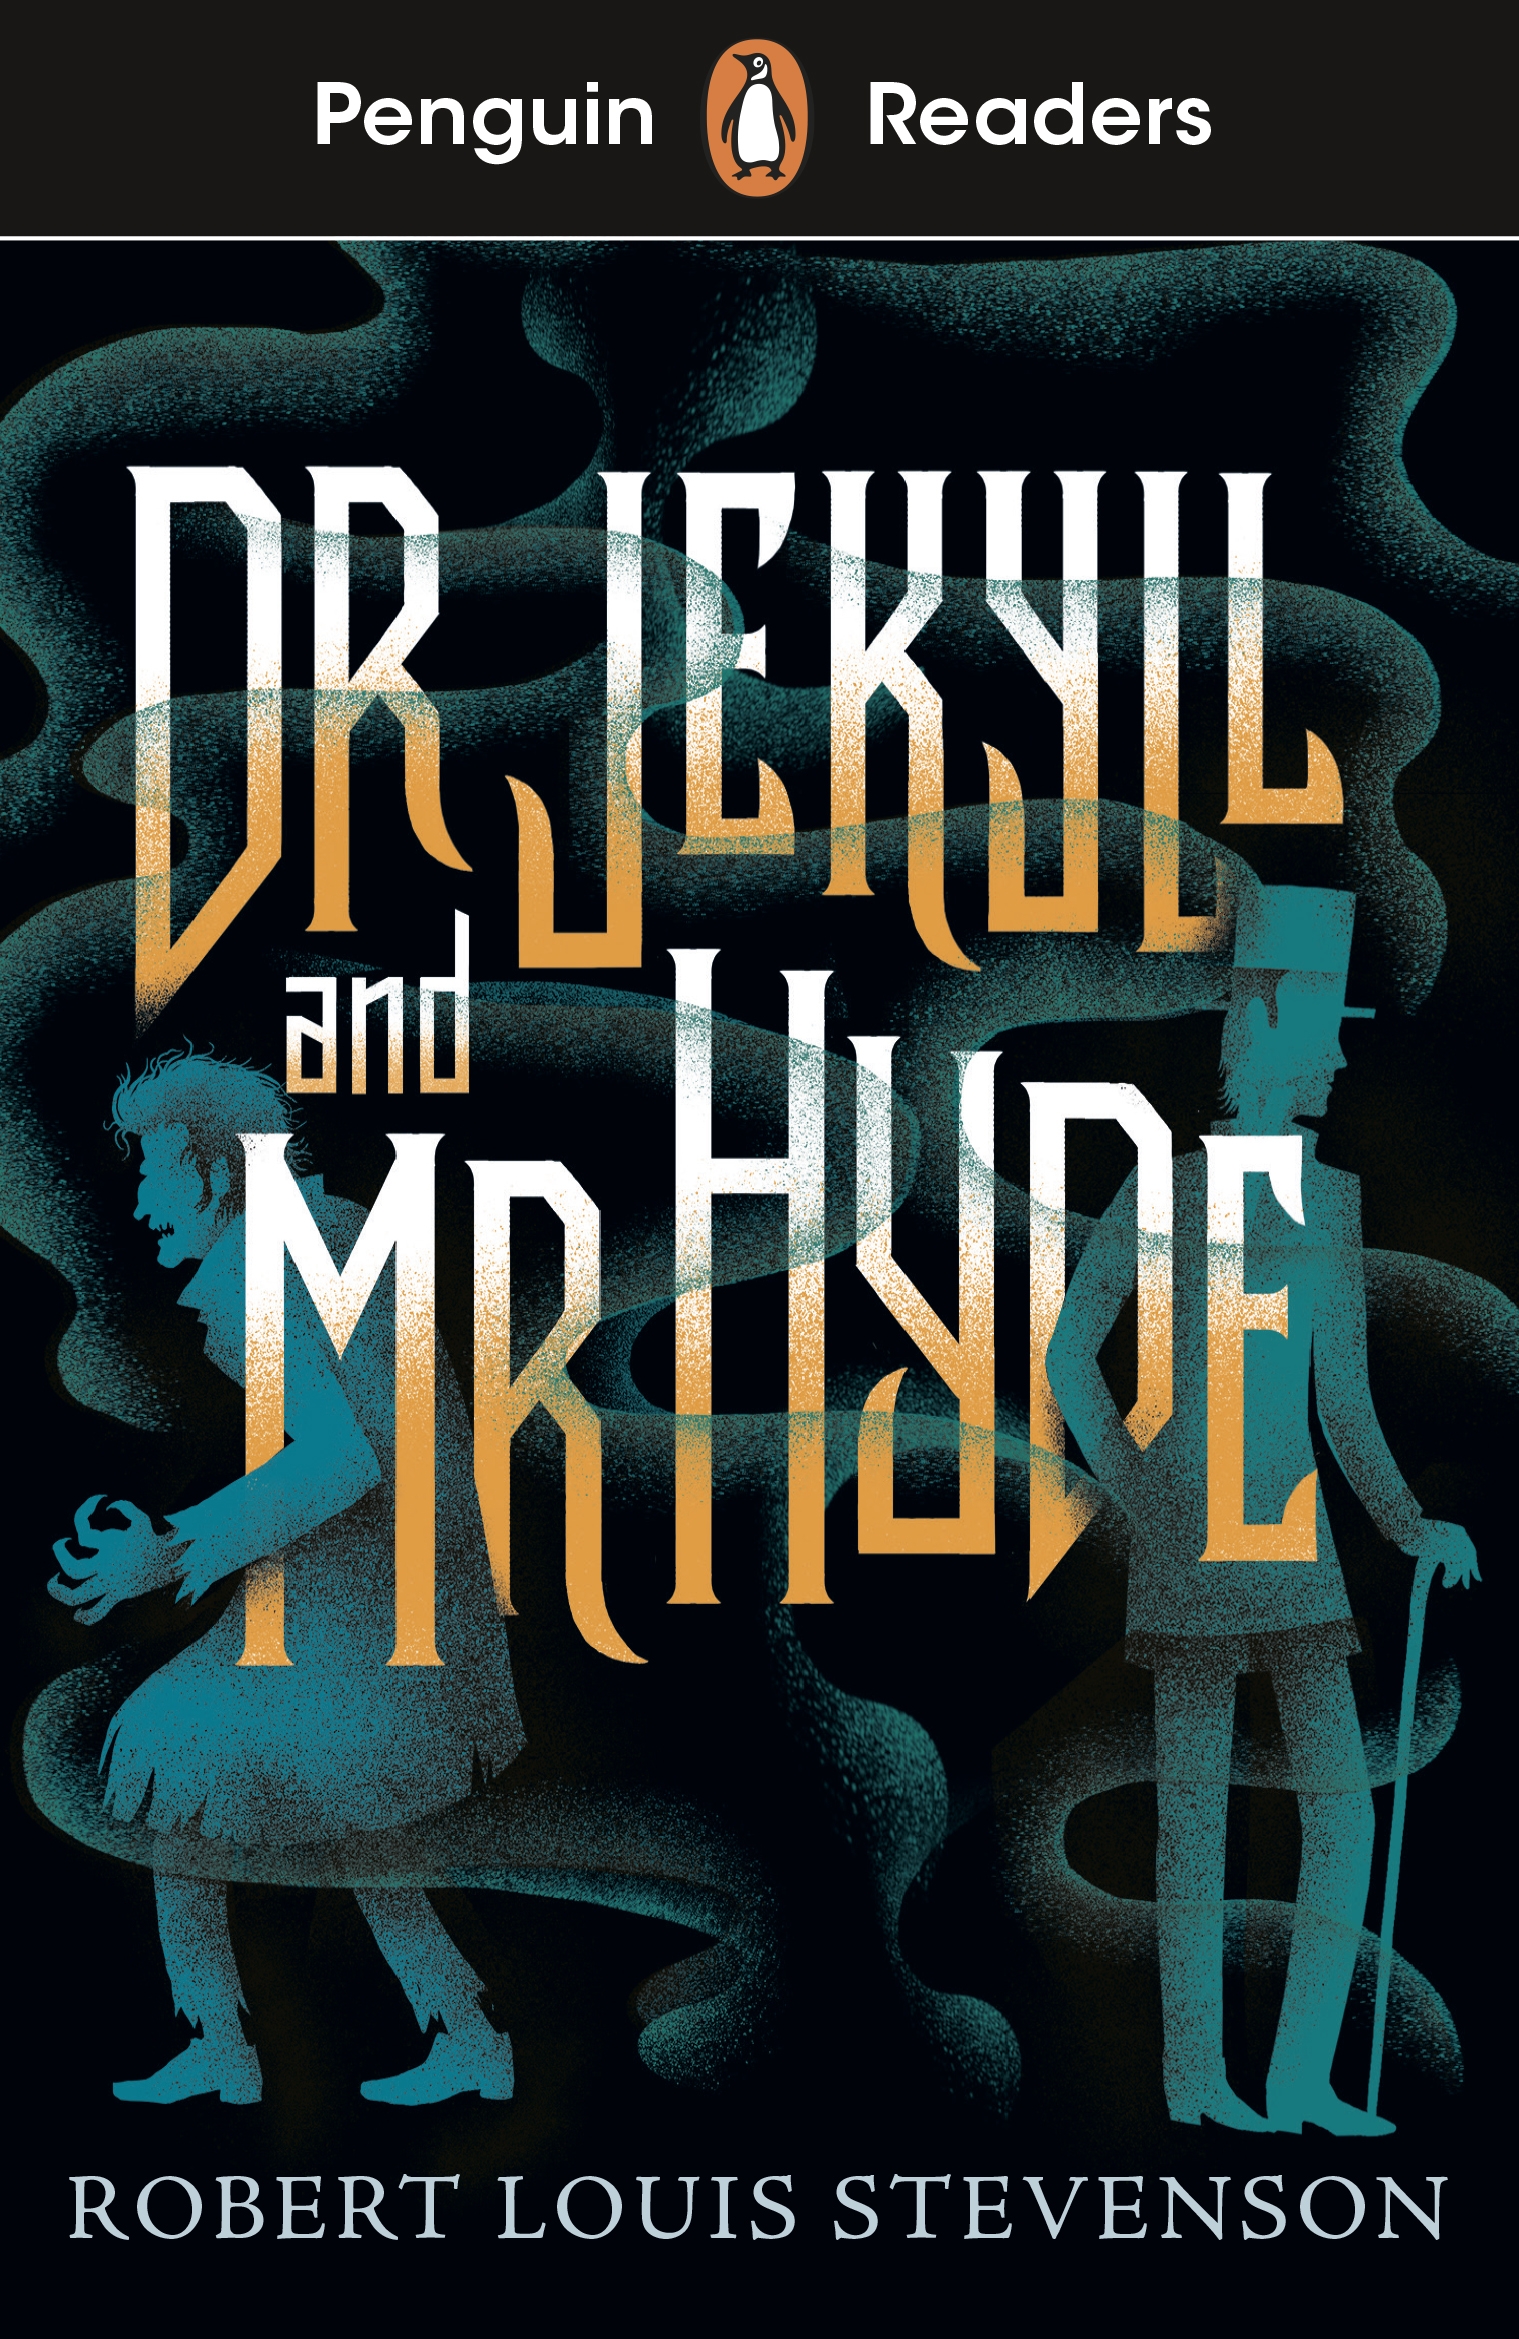 PENGUIN READERS : JEKYLL AND HYDE 1